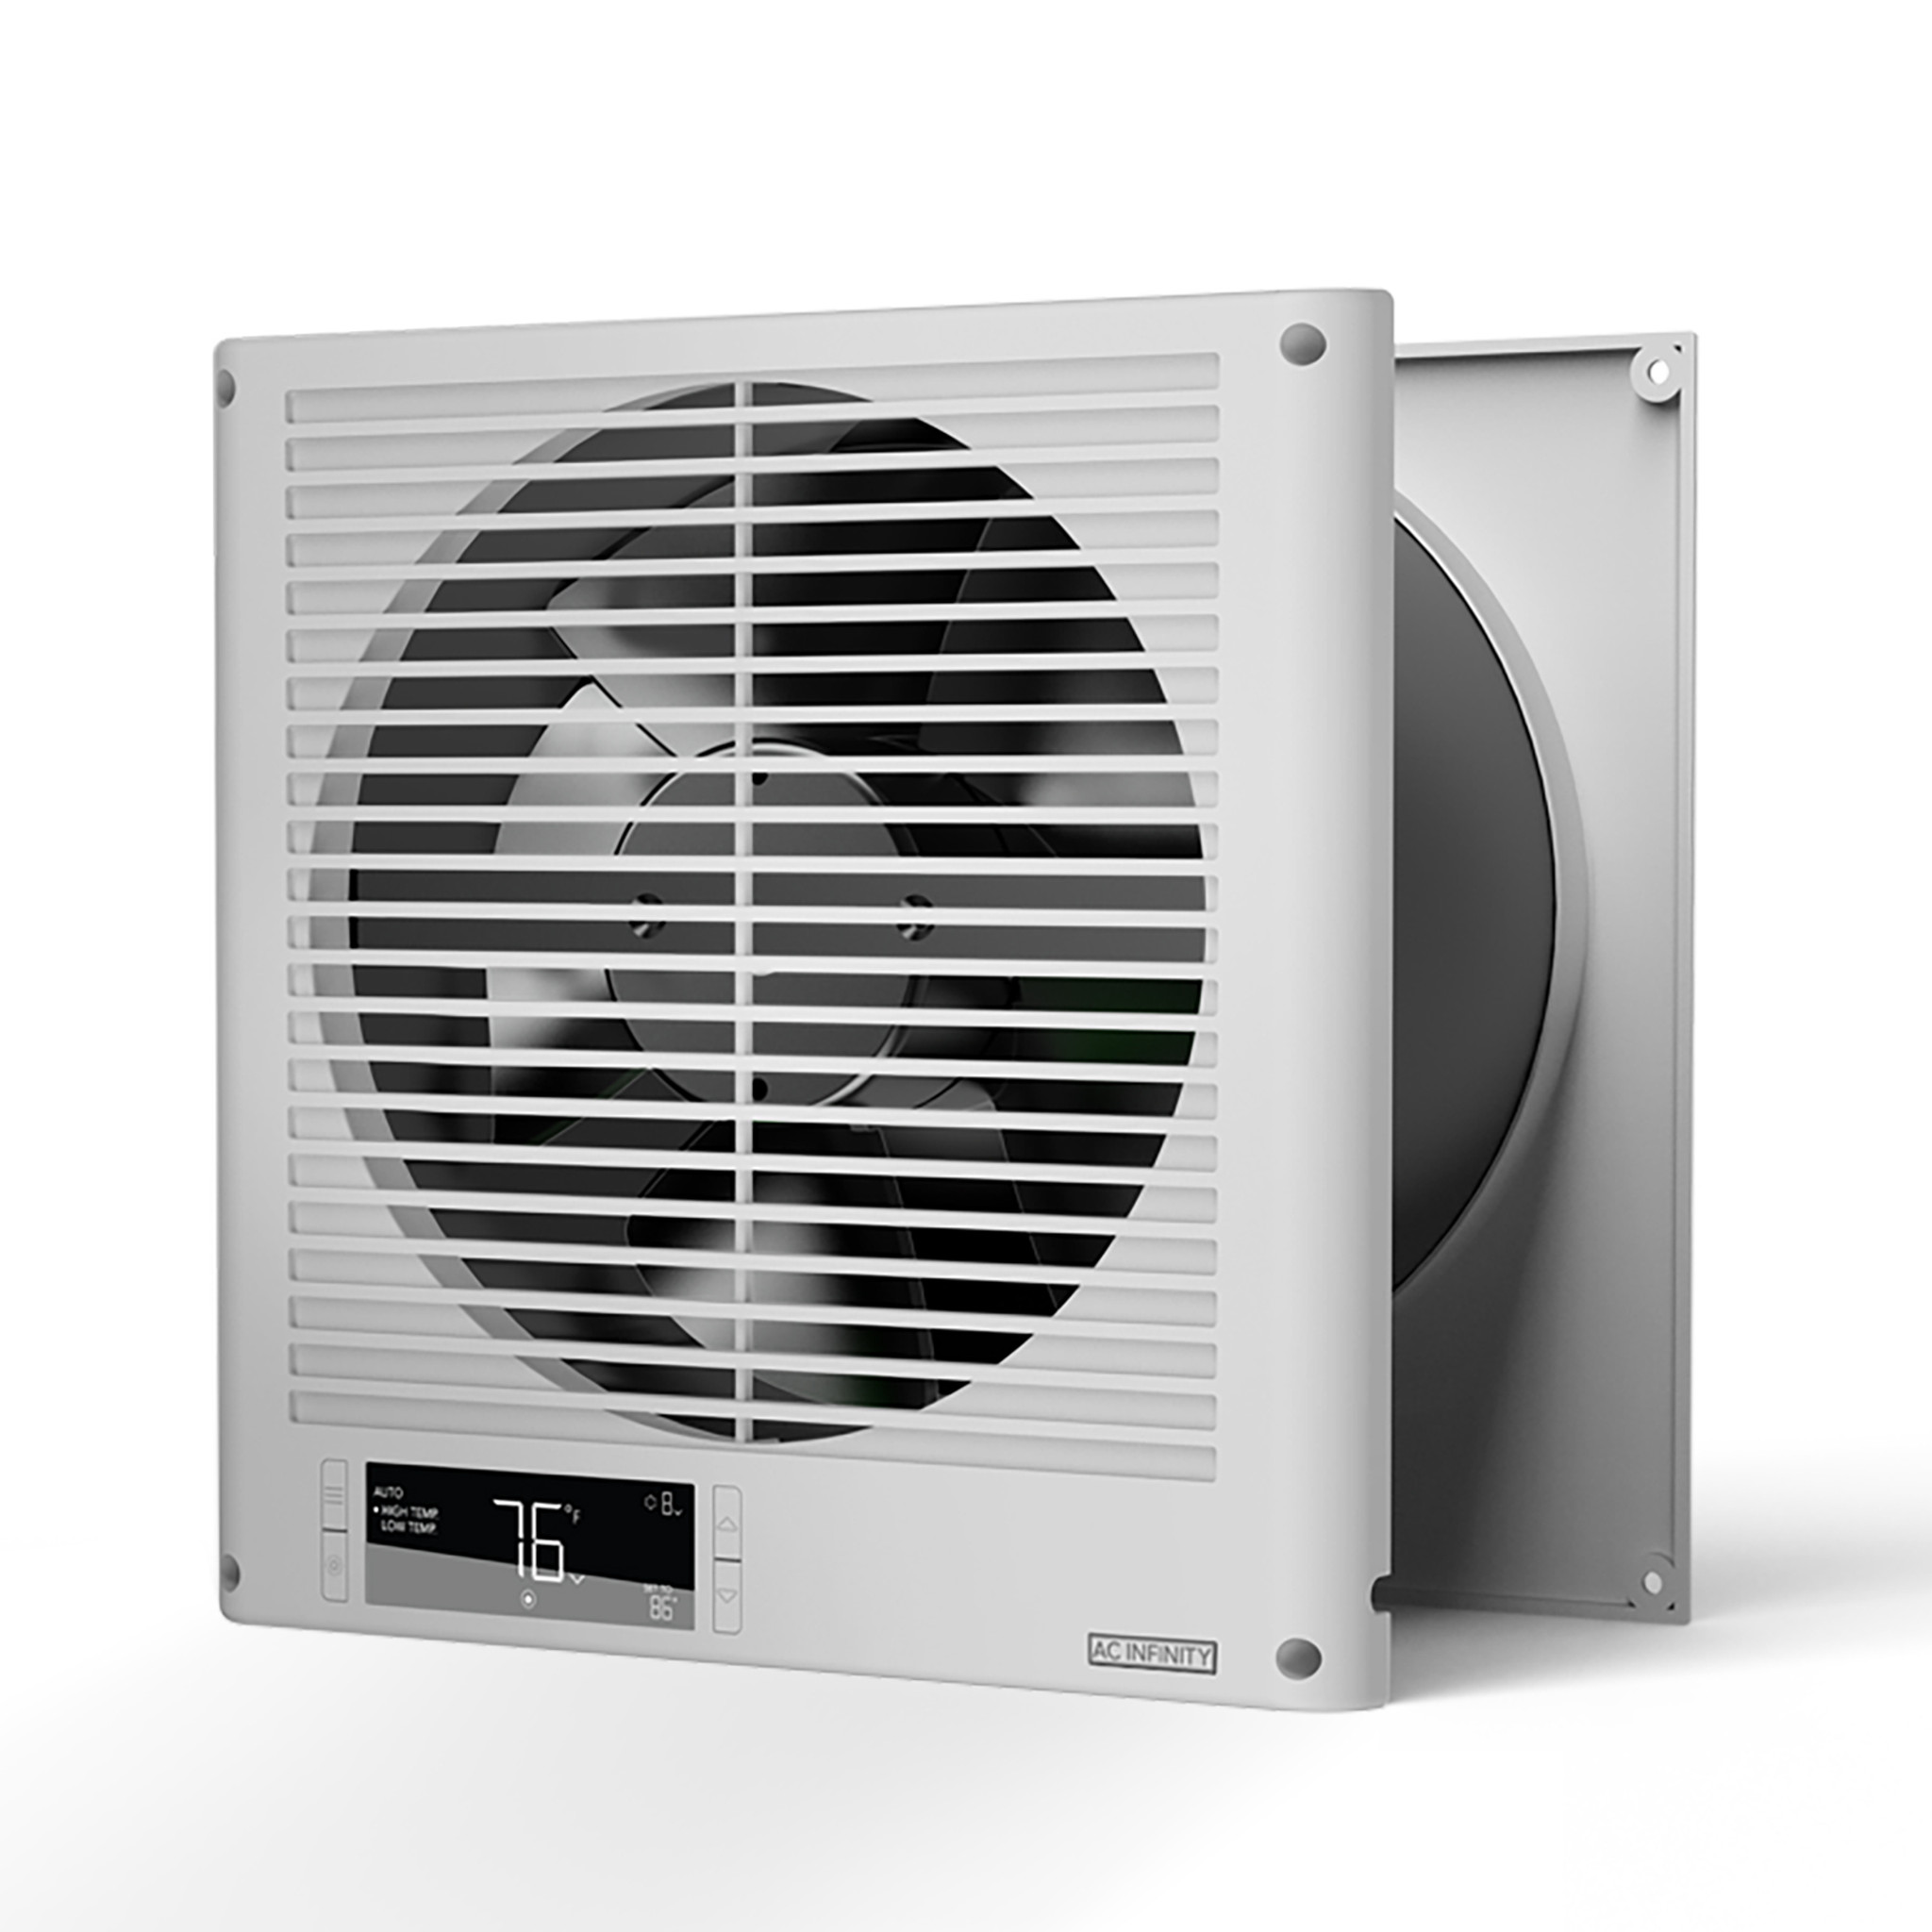 Room Room Fan, Two-Way Airflow, Temperature Controller, 8-Inch - AC Infinity